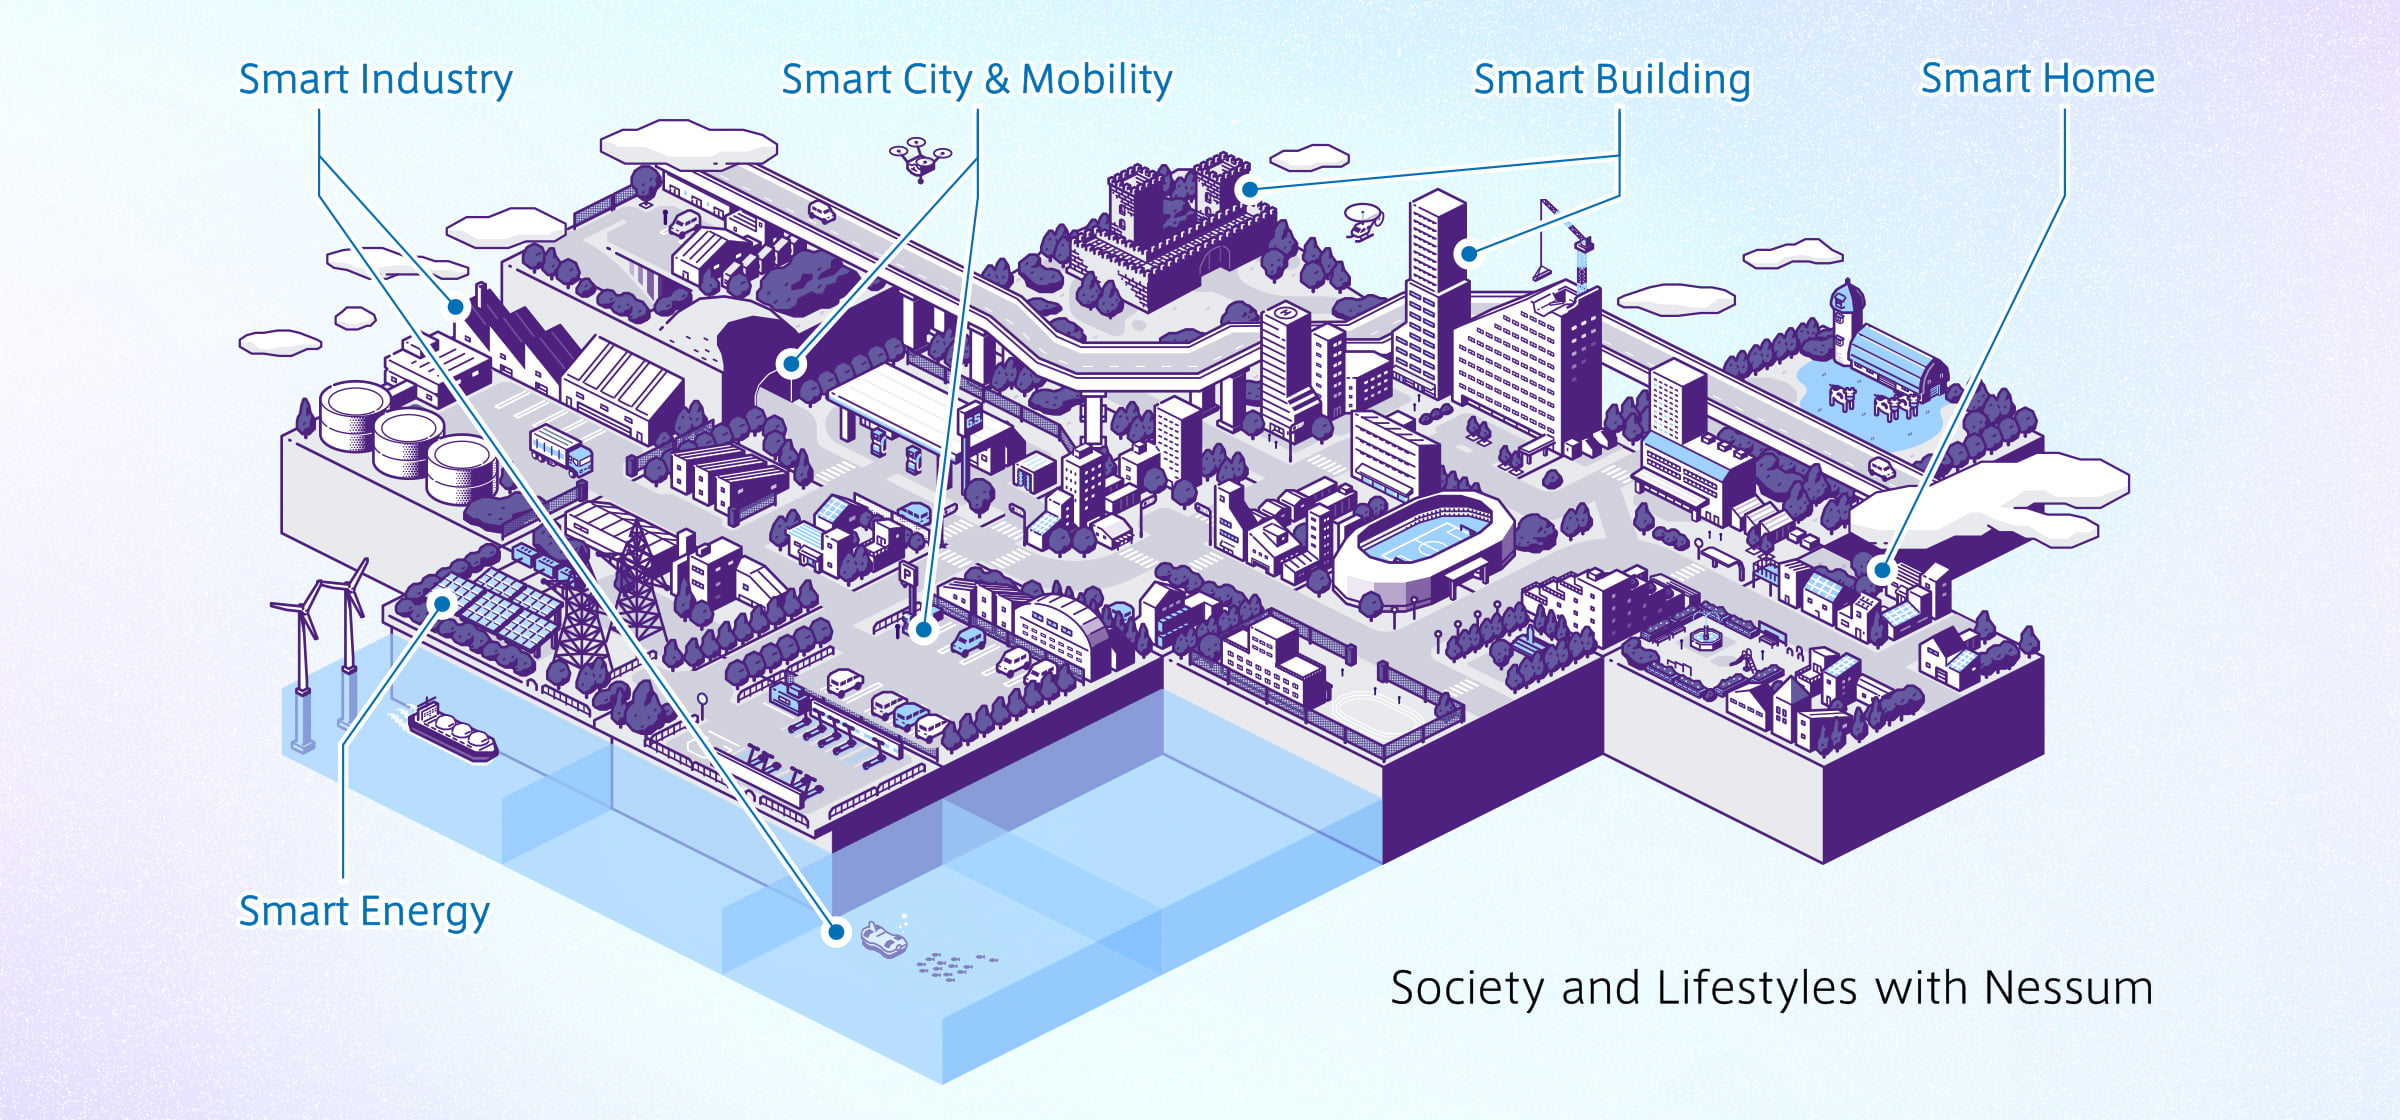 Smart Industry Smart City&Mobility Smart Building Smart Home Smart Energy Society and Lifestyles with Nessum